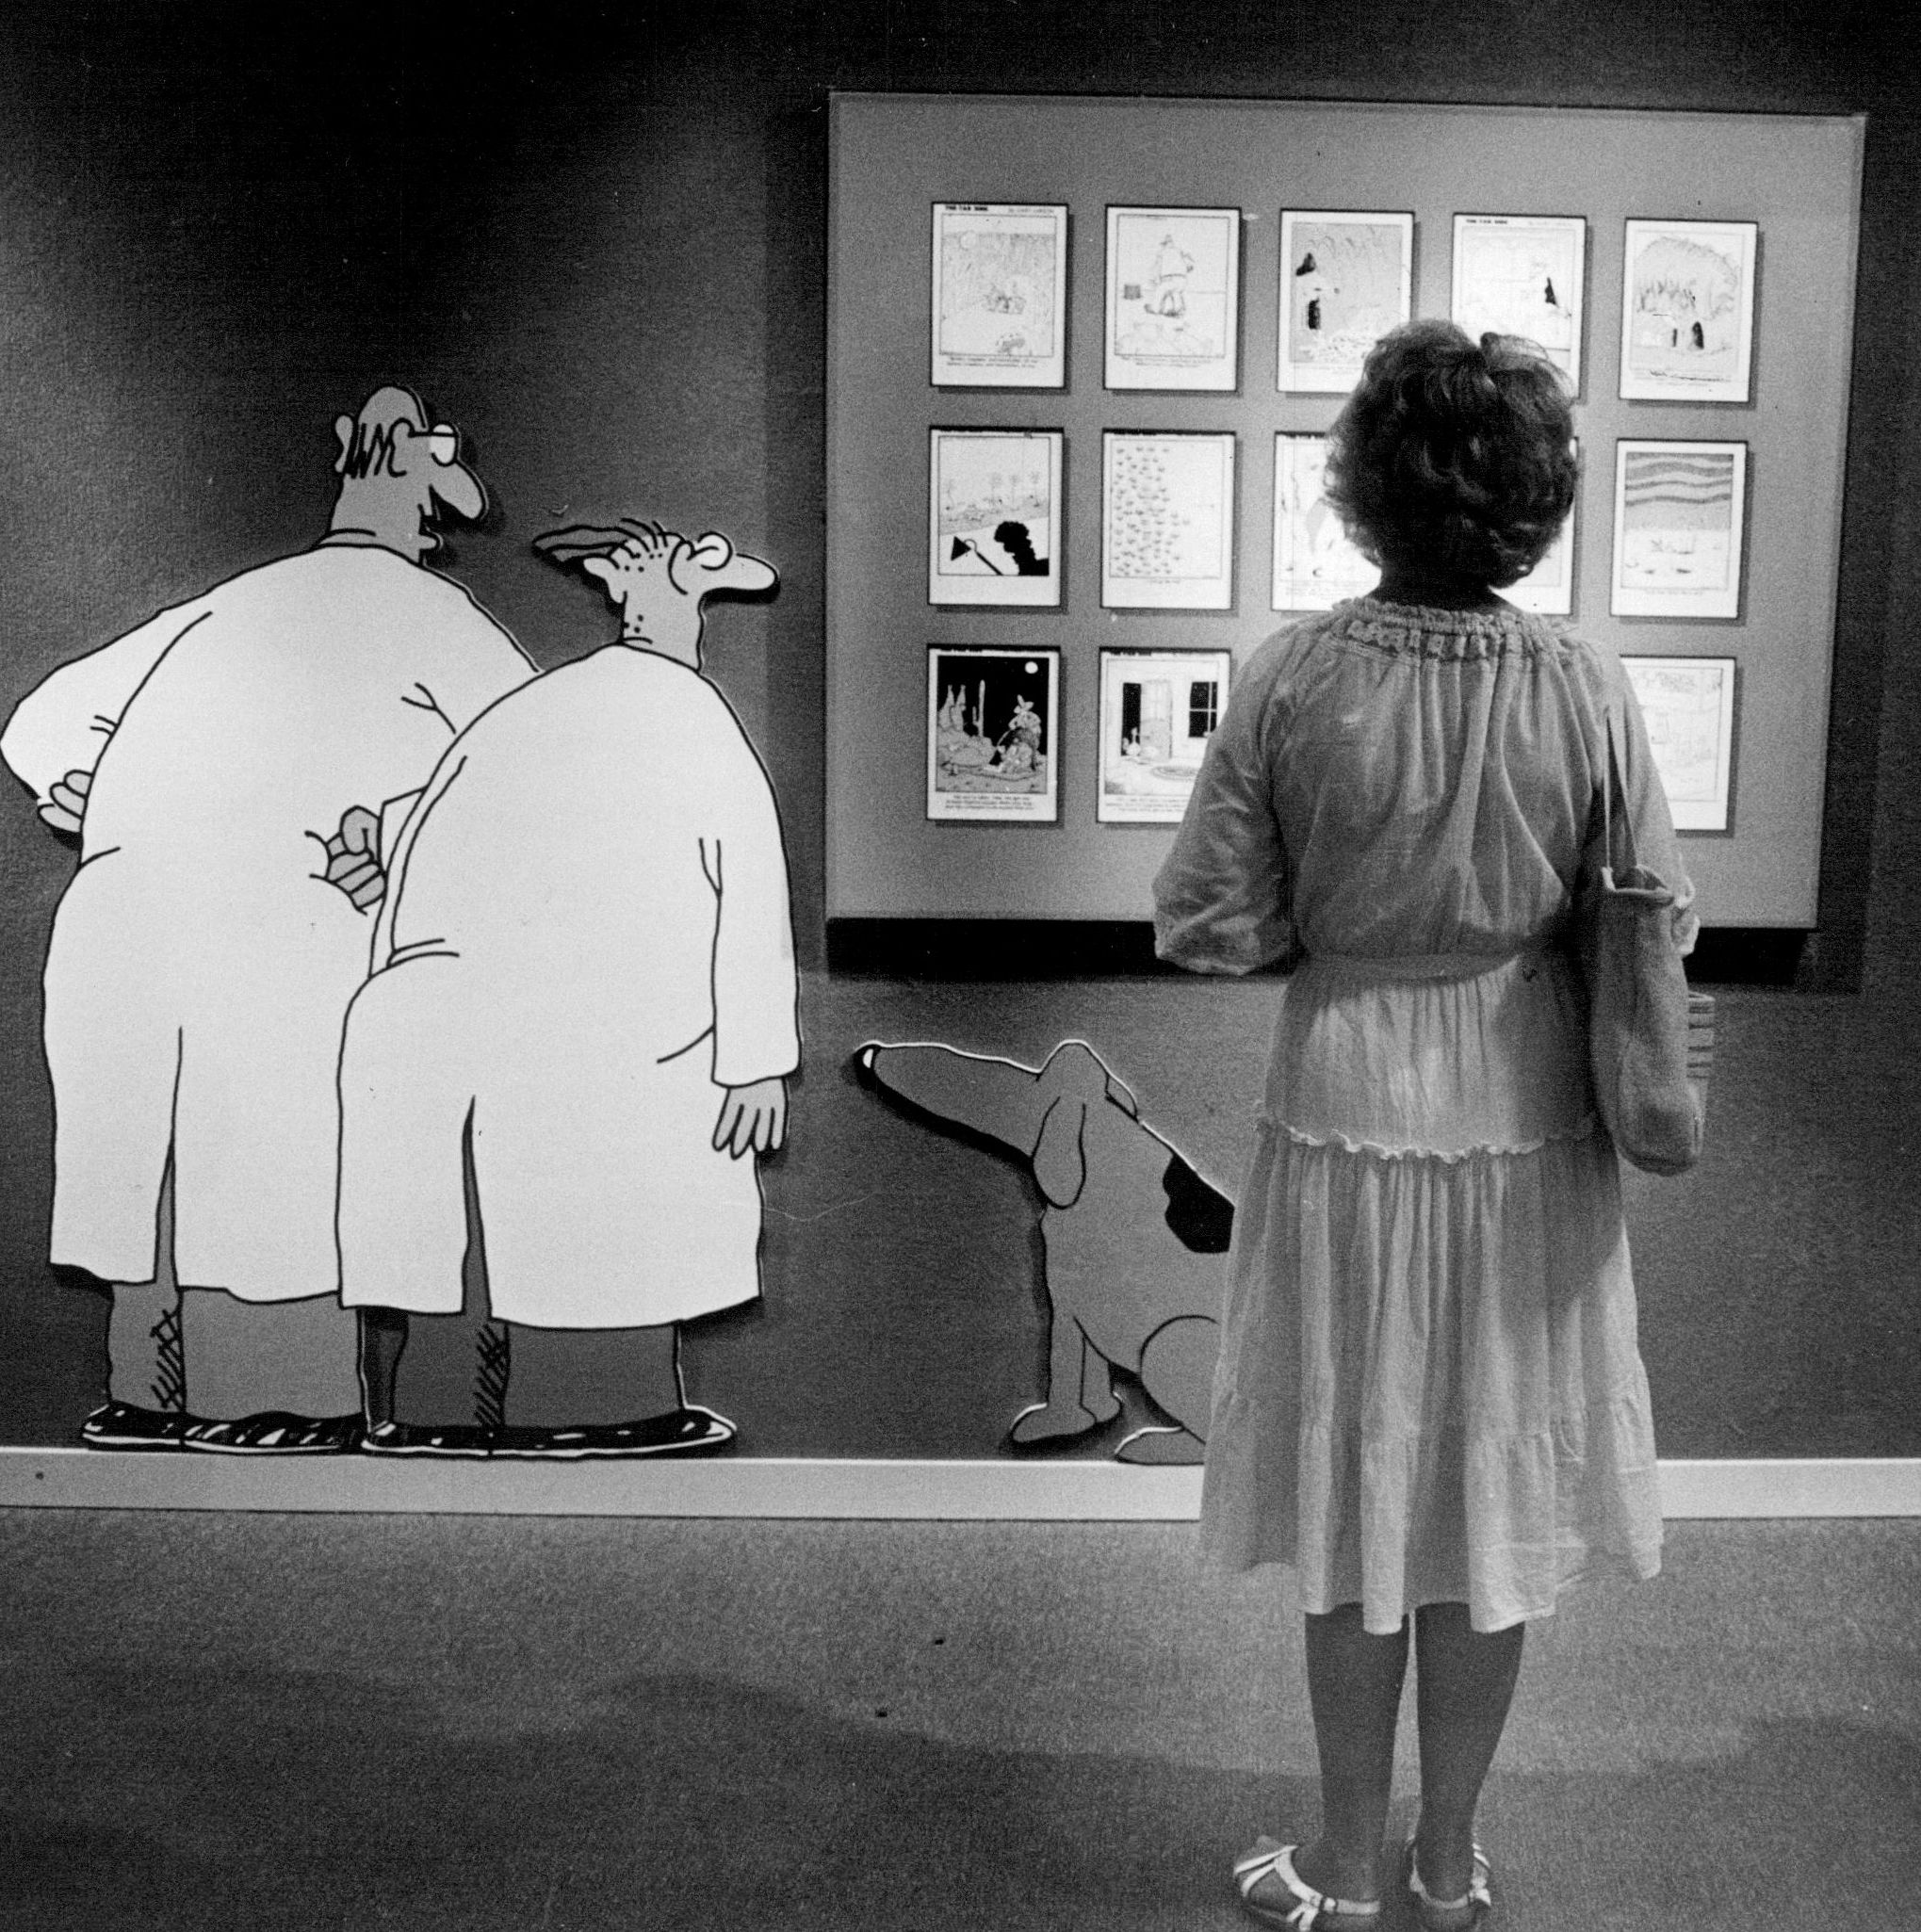 Art Industry News: Far Side Cartoon Artist Gary Larson Just Published His  First New Cartoons in 25 Years + Other Stories